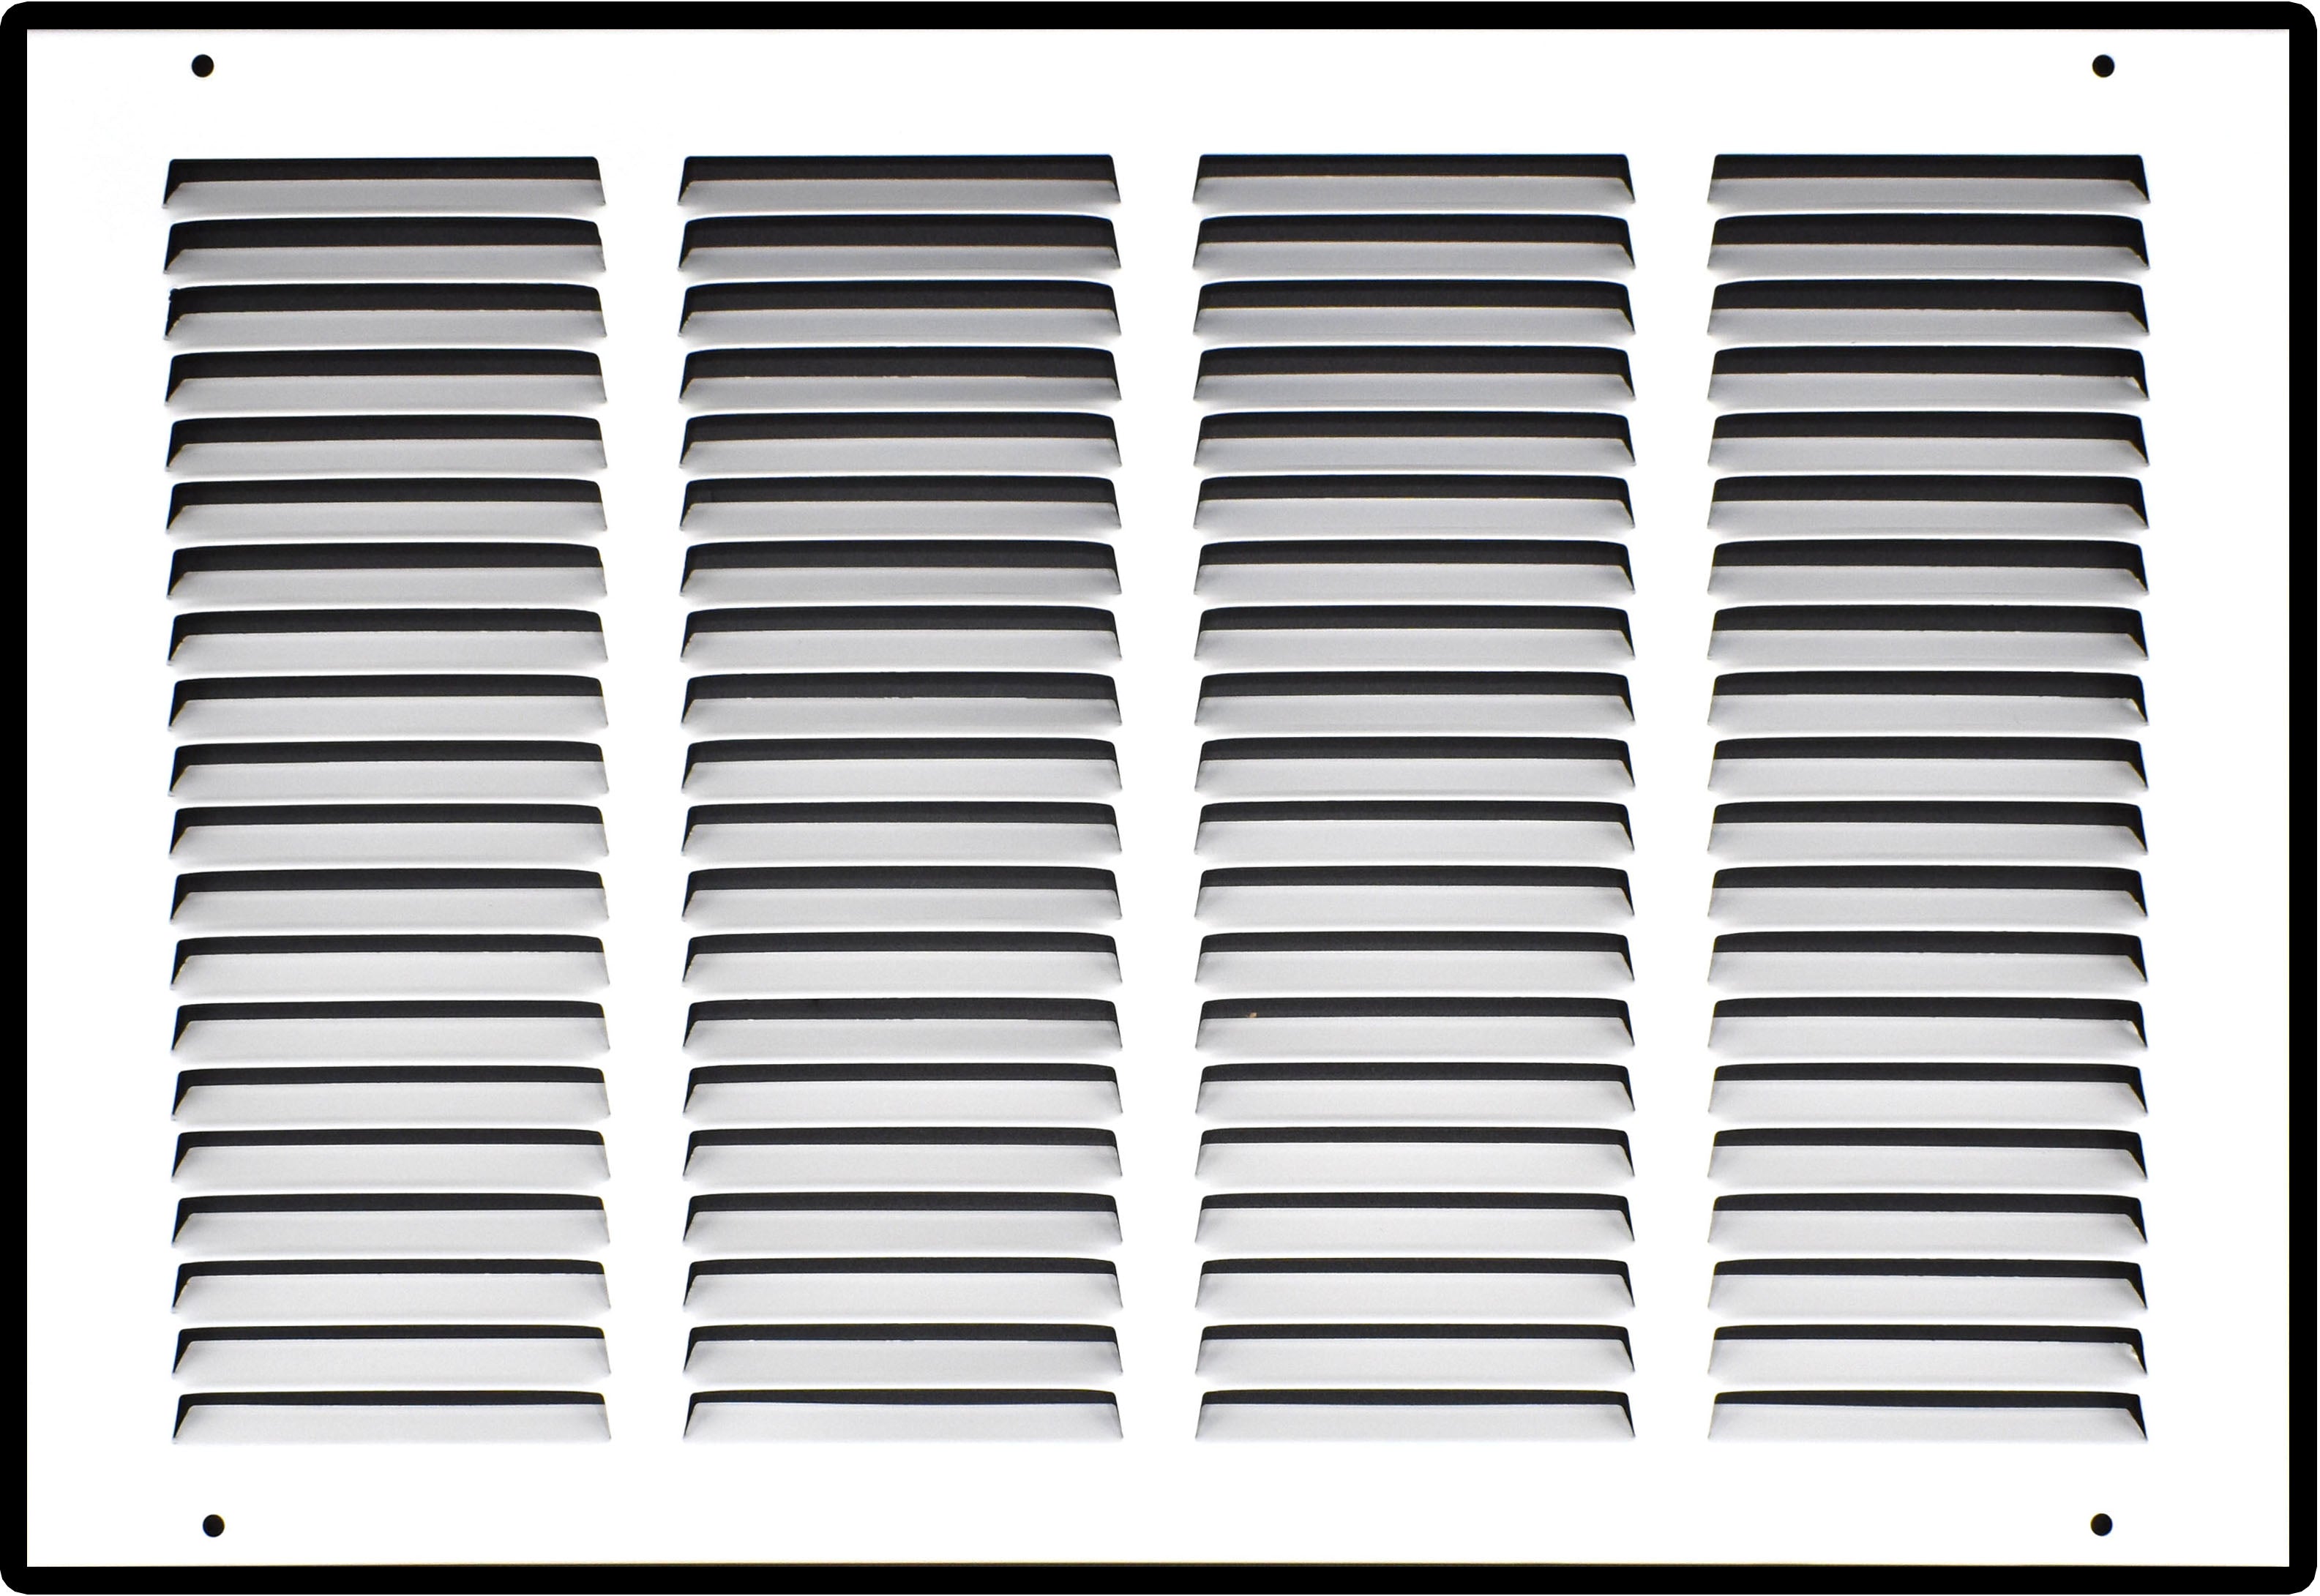 airgrilles 16" x 10" duct opening  -  hd steel return air grille for sidewall and ceiling (agc) 7agc-flt-wh-16x10 756014649543 - 1